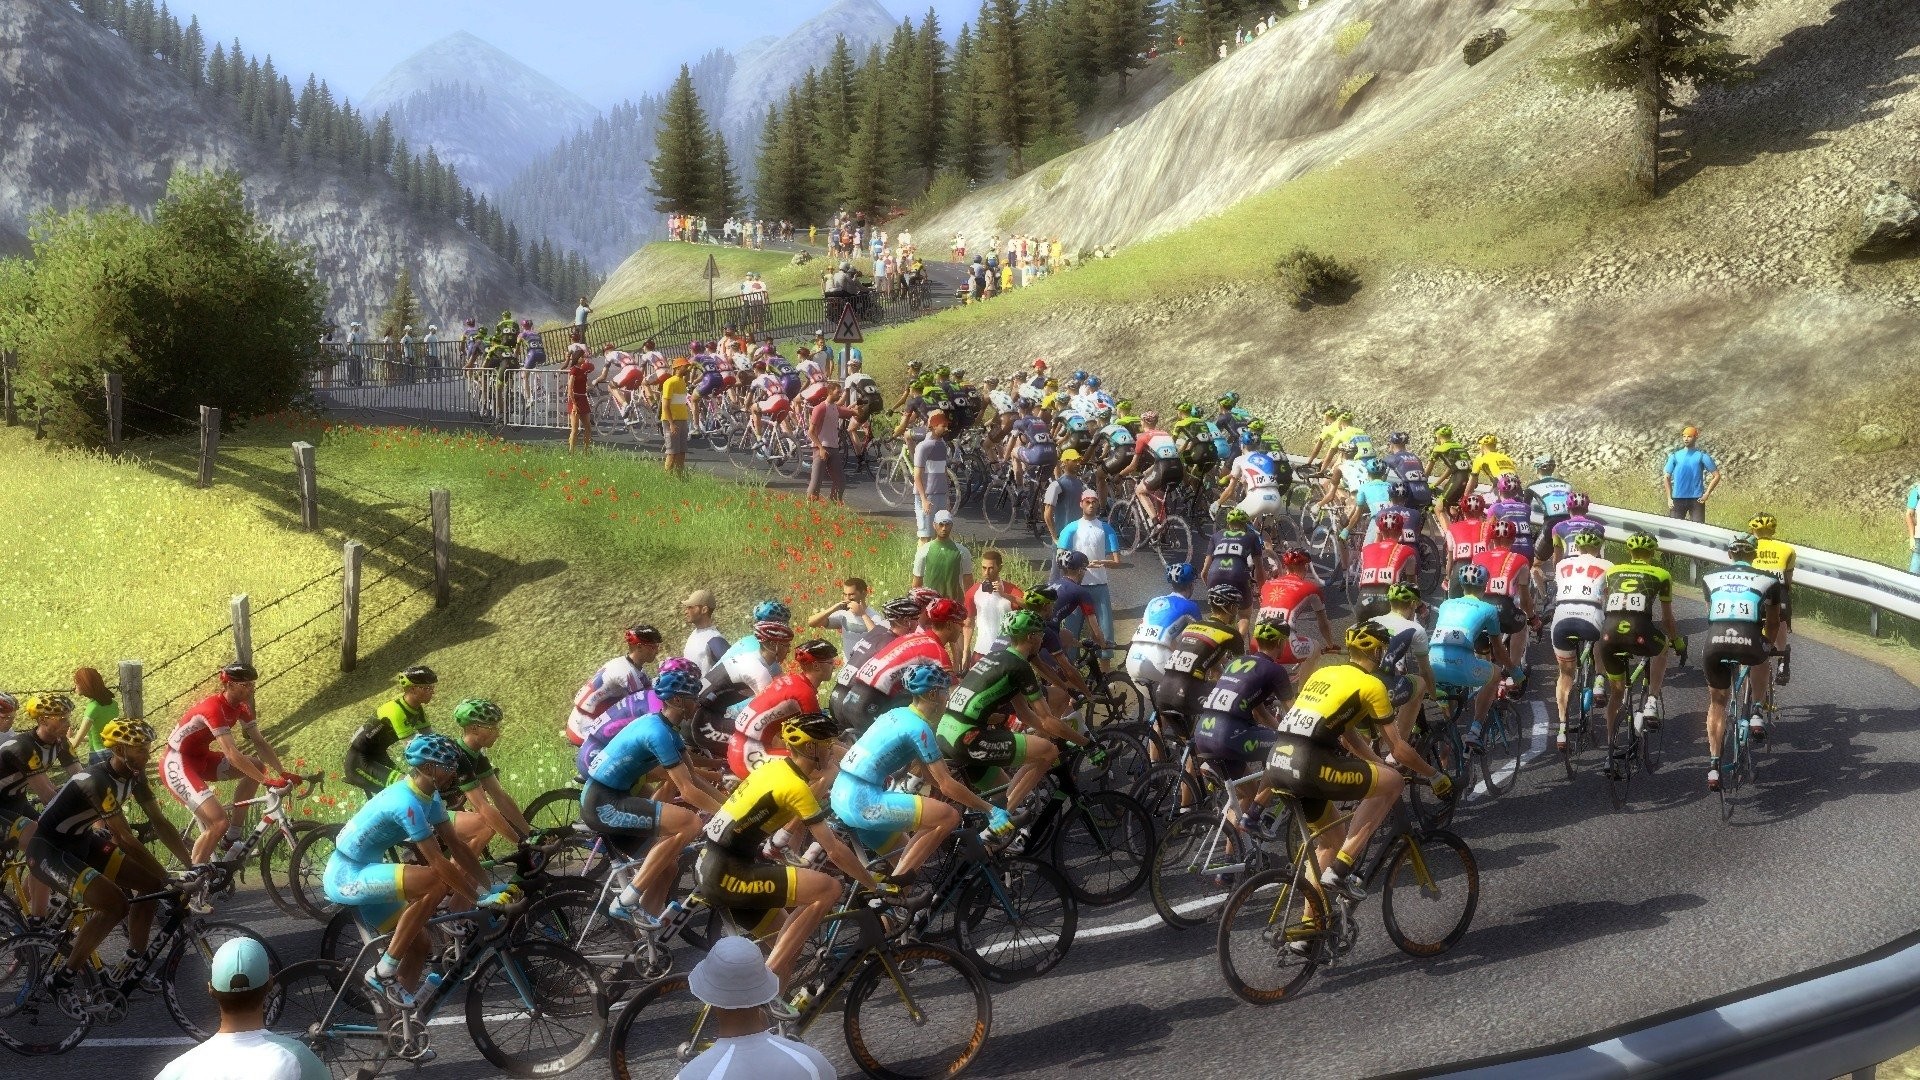 1920x1080 Tour De France 2015 Screenshots, Pictures, Wallpapers - PlayStation 3 - IGN